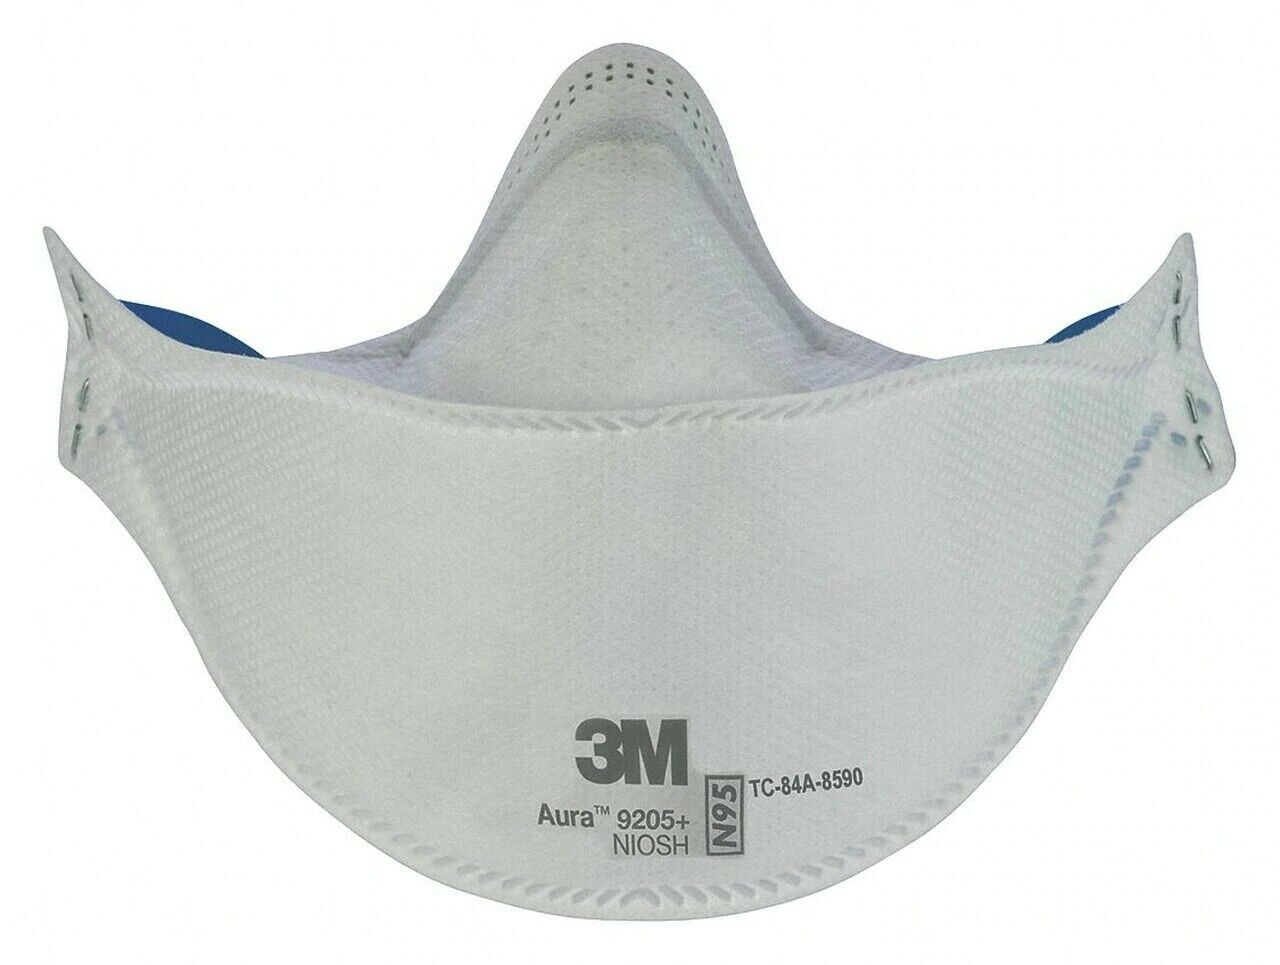 *20-Pack* 3M Aura N95 Protective Disposable Respirator Face Mask 9205+ 3M 9205+ 9205 - фотография #3